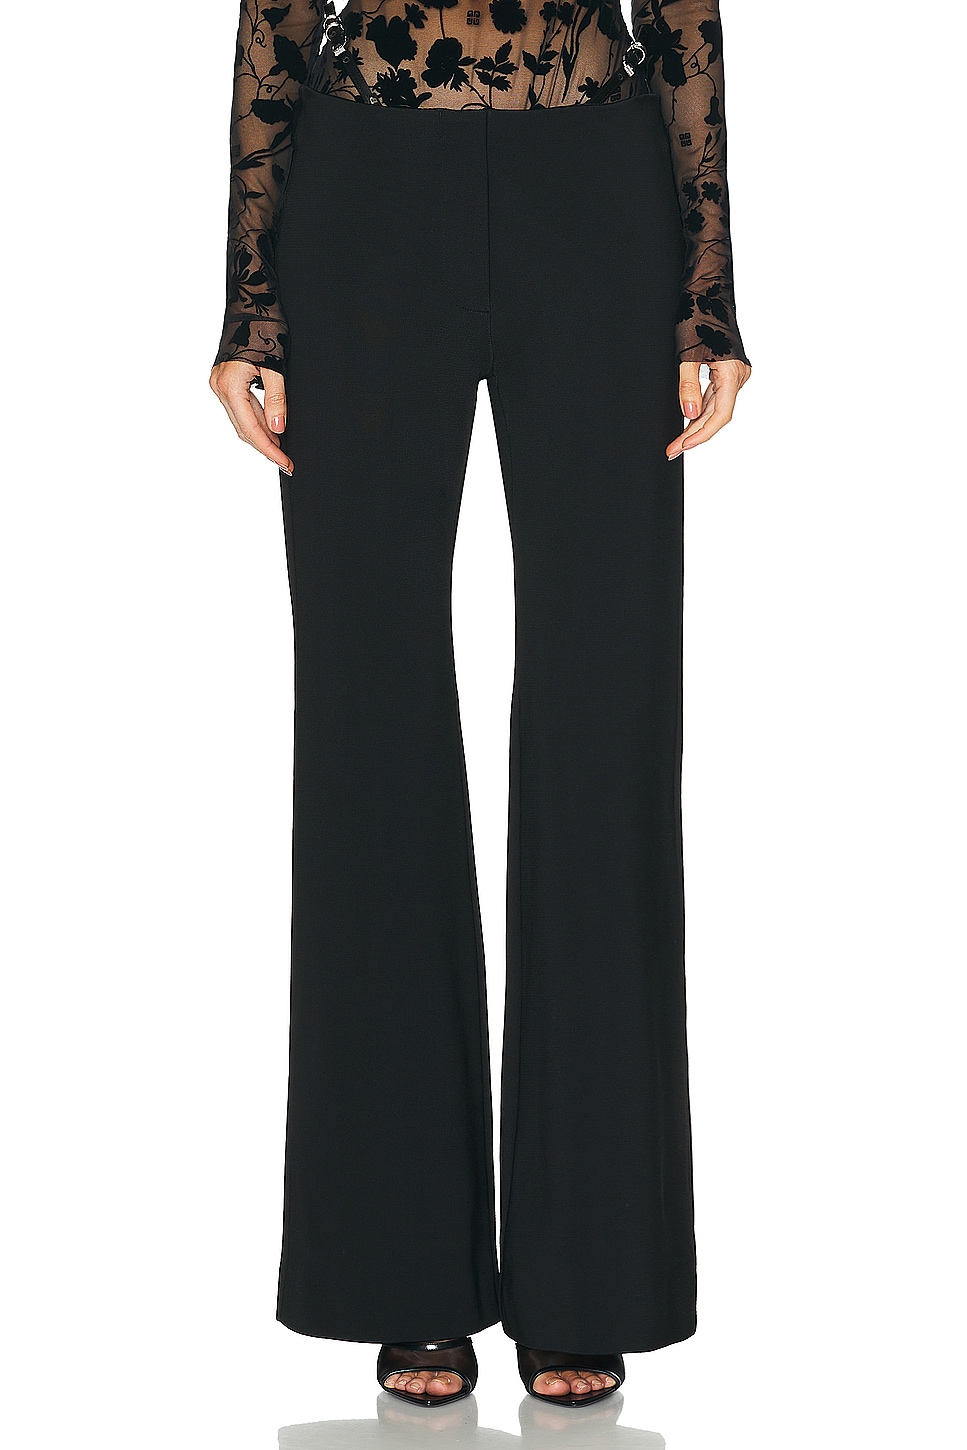 Image 1 of Givenchy Voyou Belt Pant in Black